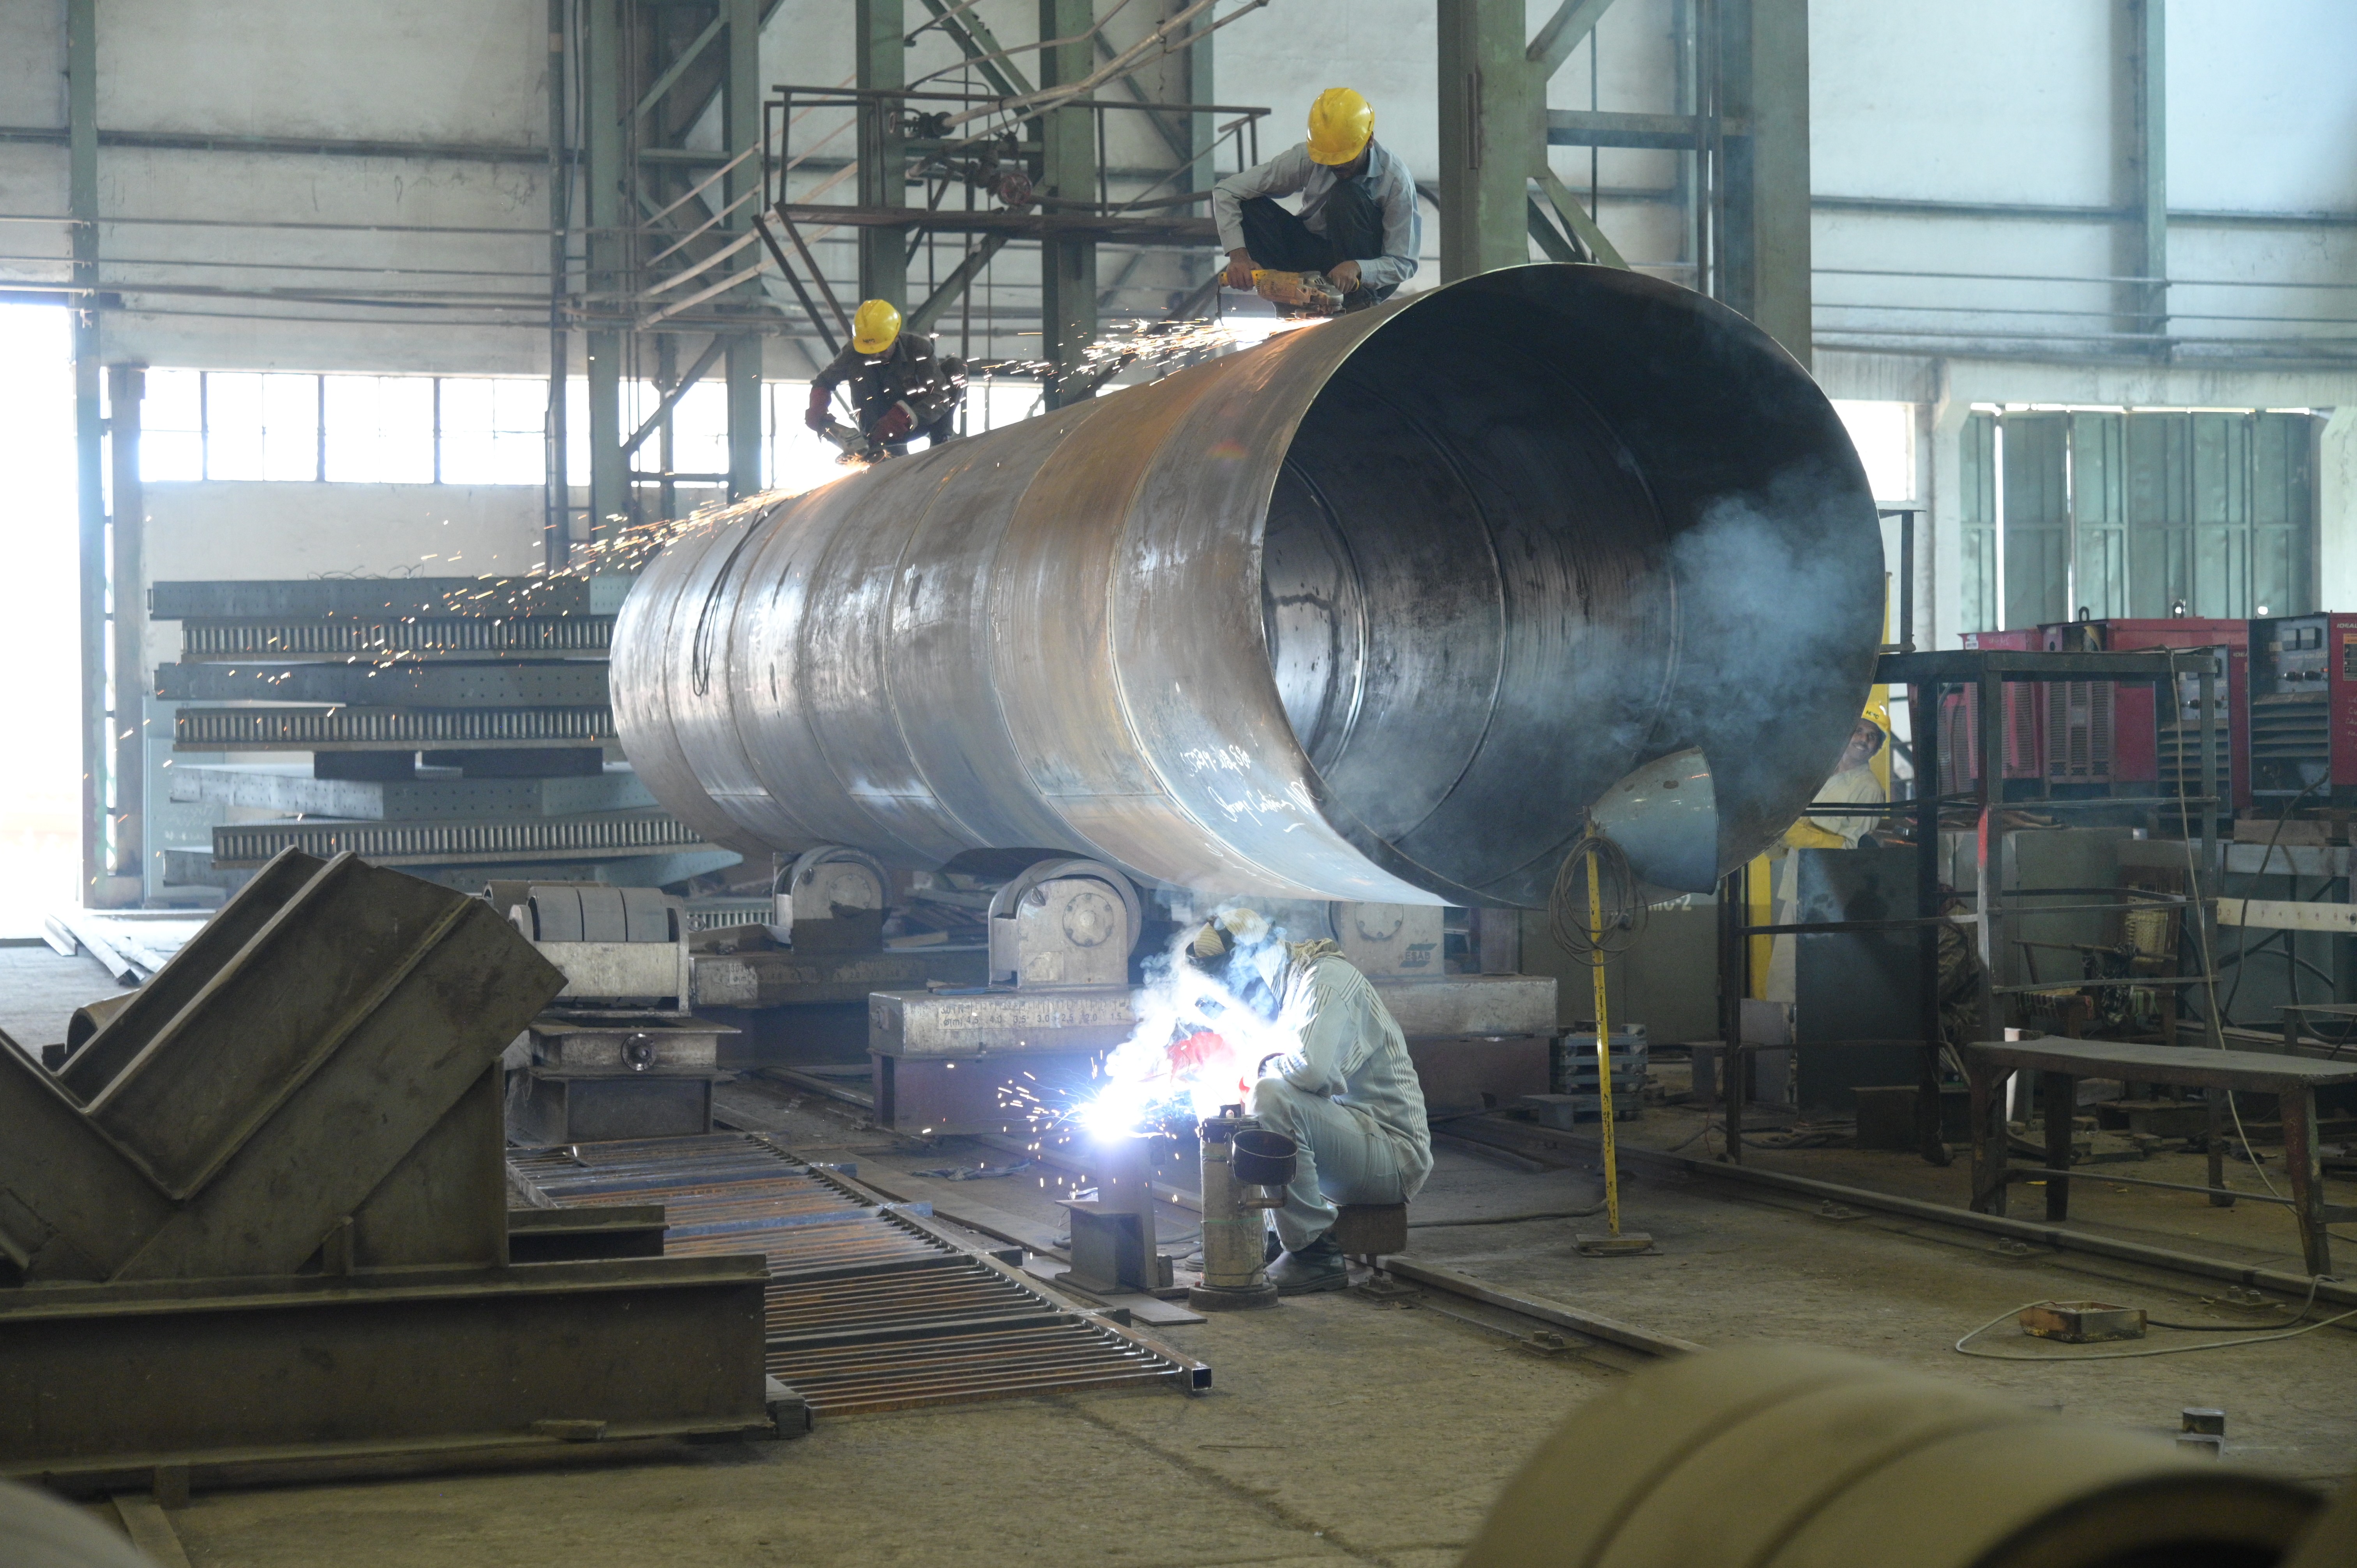 workers busy in final finishing of the large cylinderical pipe